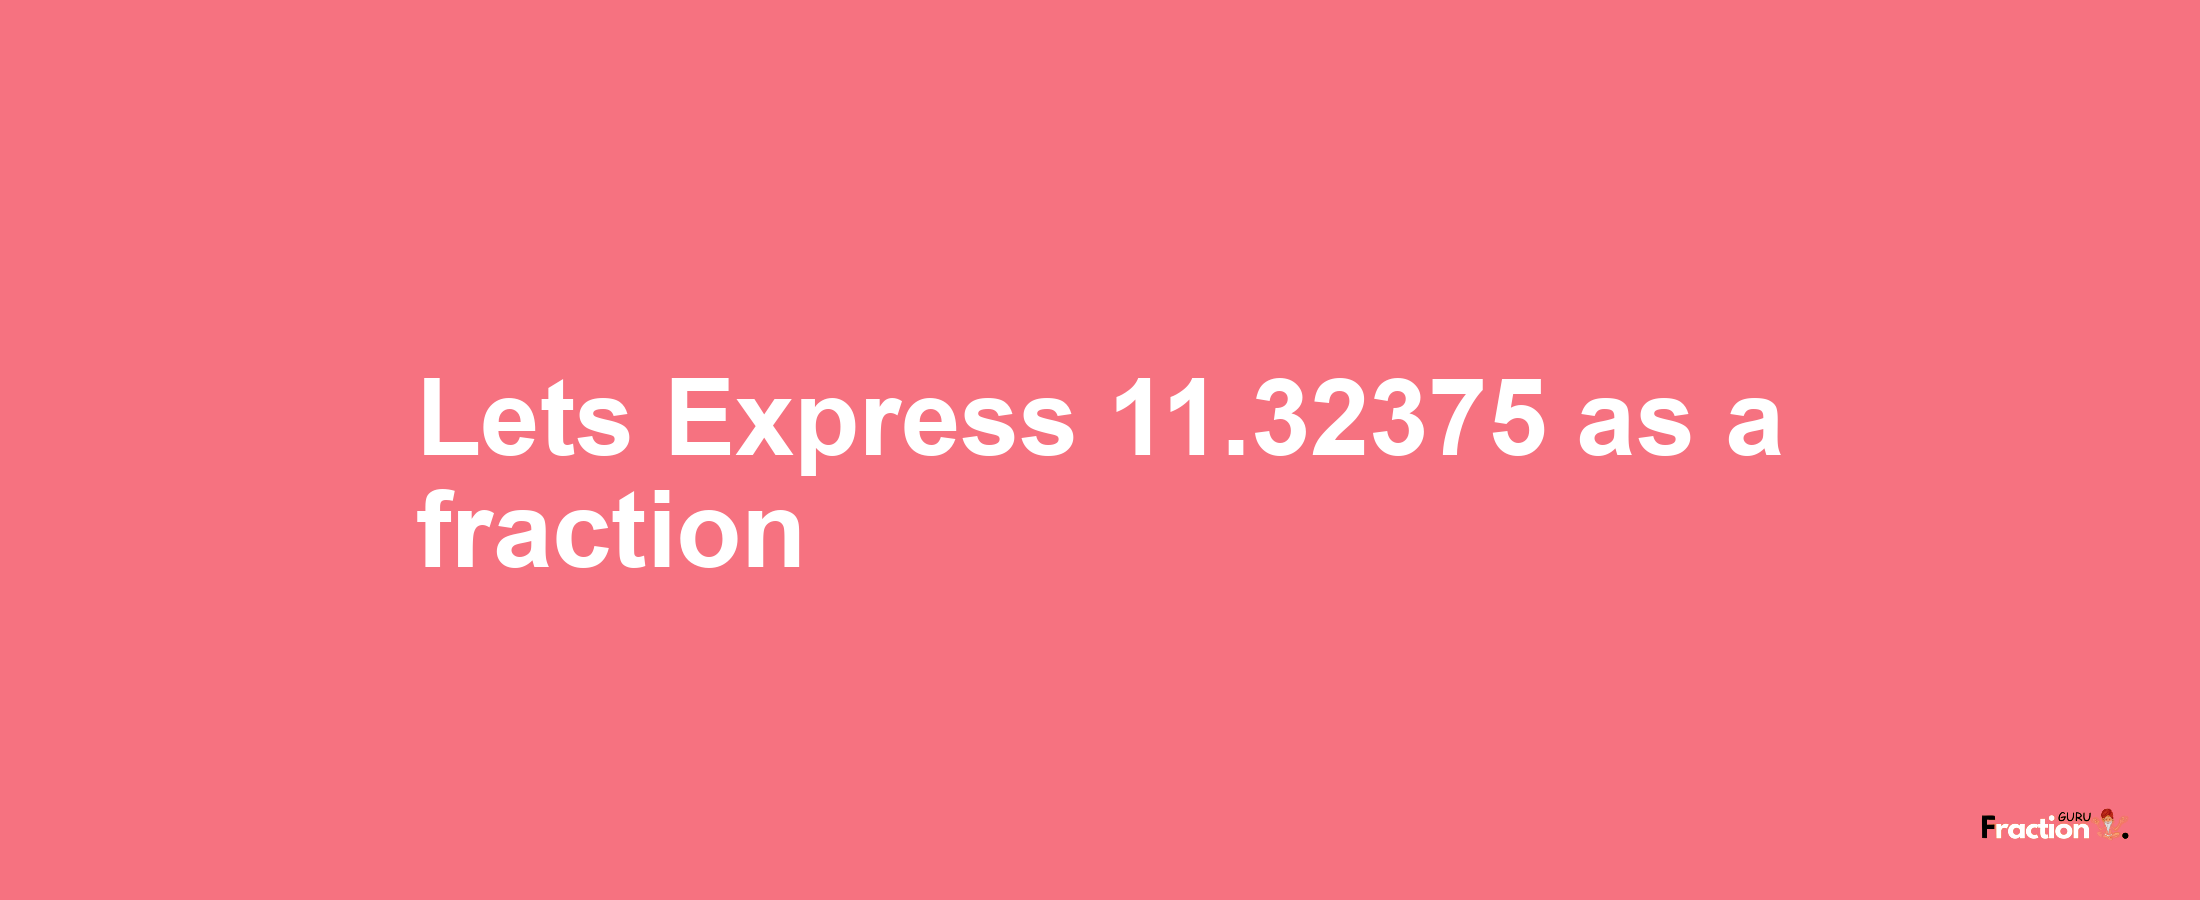 Lets Express 11.32375 as afraction